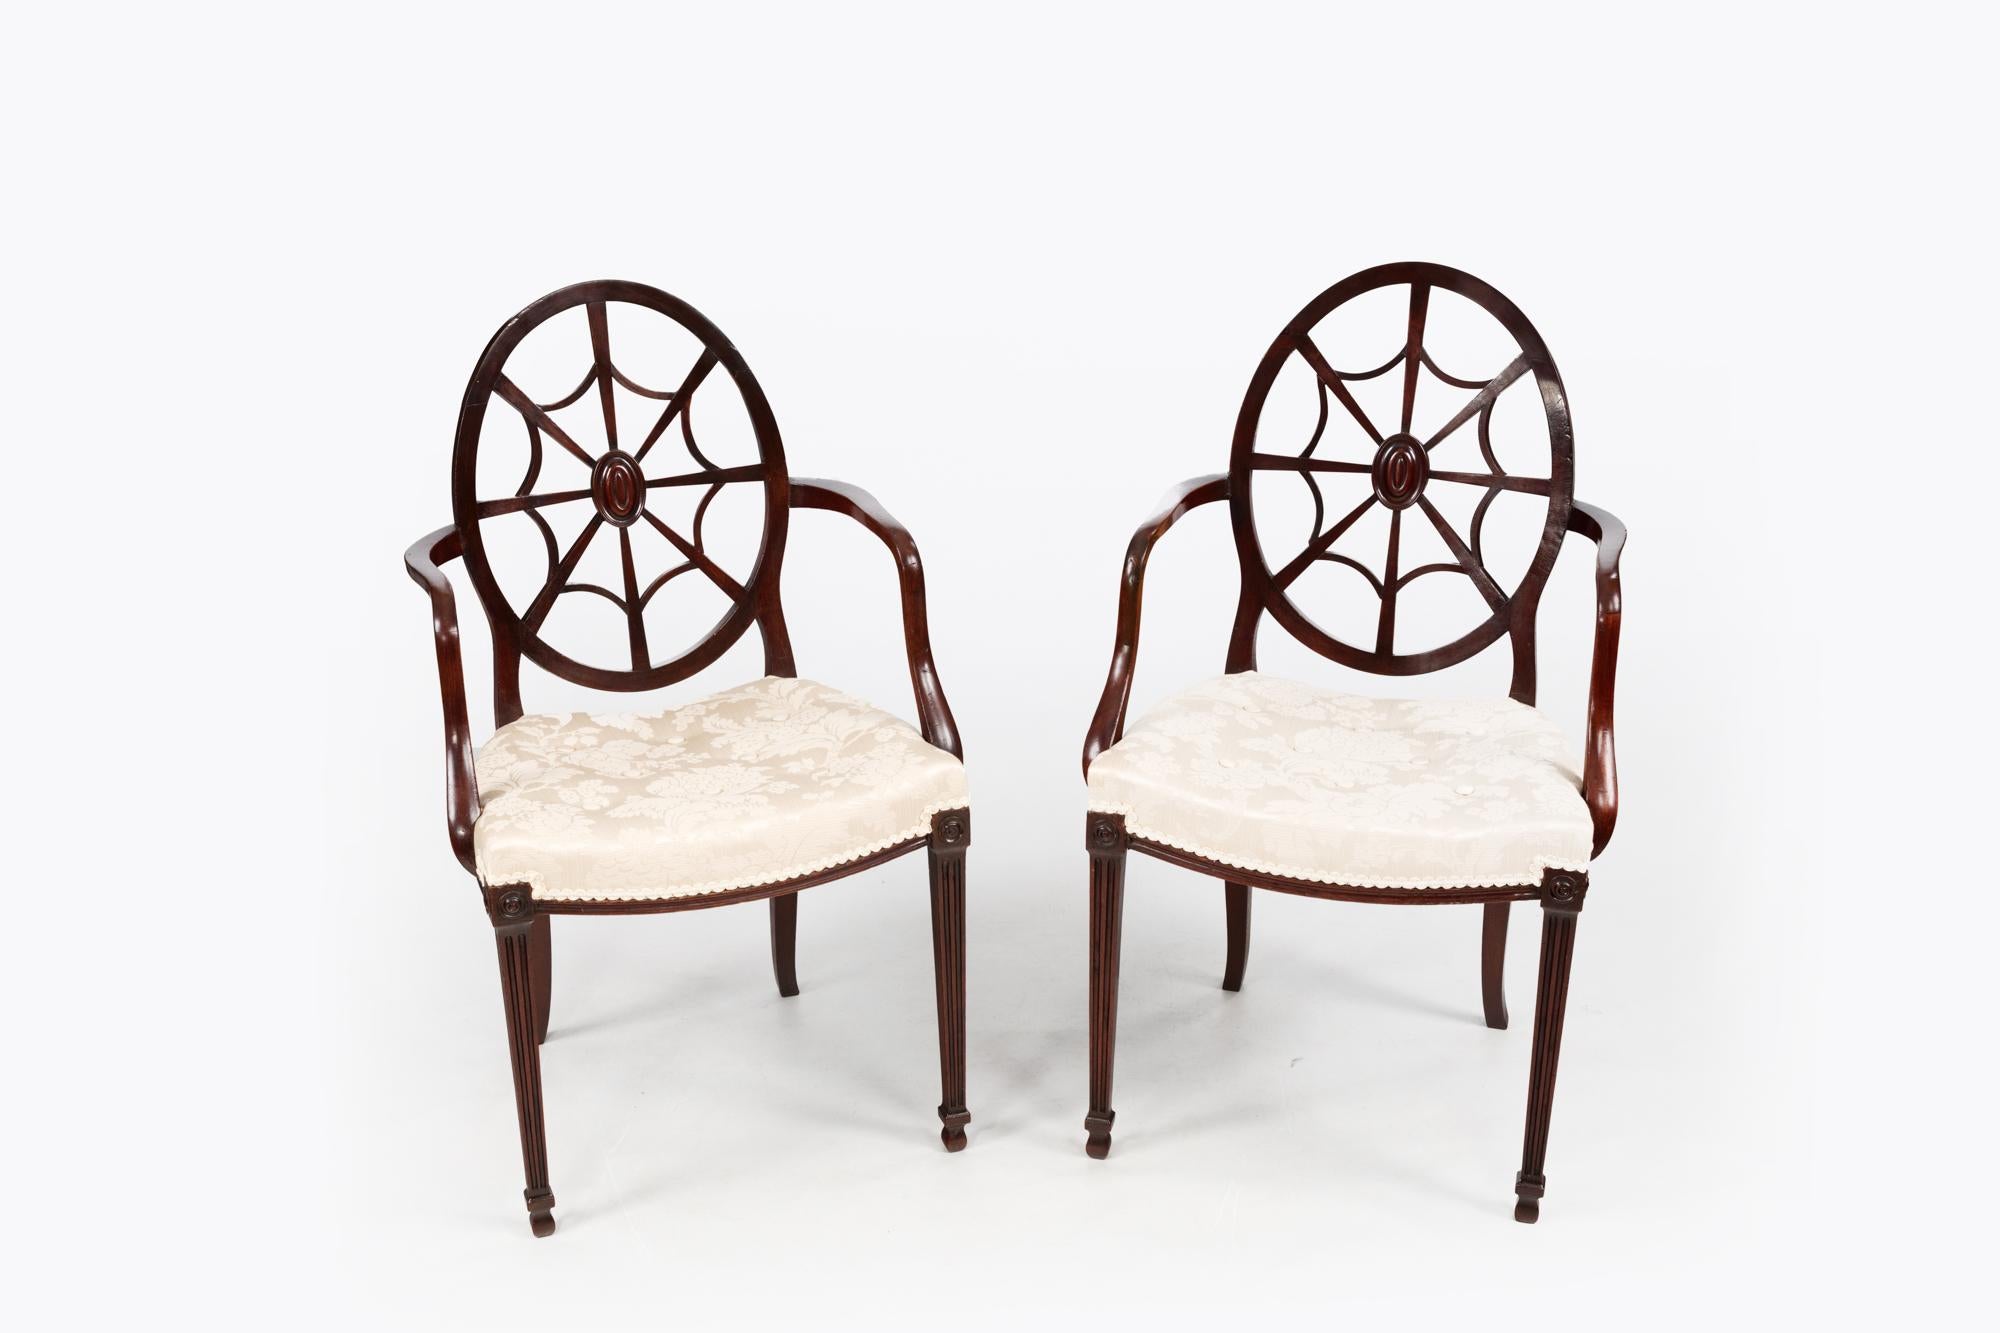 A fine pair of Hepplewhite style wheelback armchairs with oval-shaped backrests and spiderweb detailing, shaped reeded armrests & stuffed over seats. These chairs are raised on tapered spade front legs and sabre back legs. Circa early 19th century.